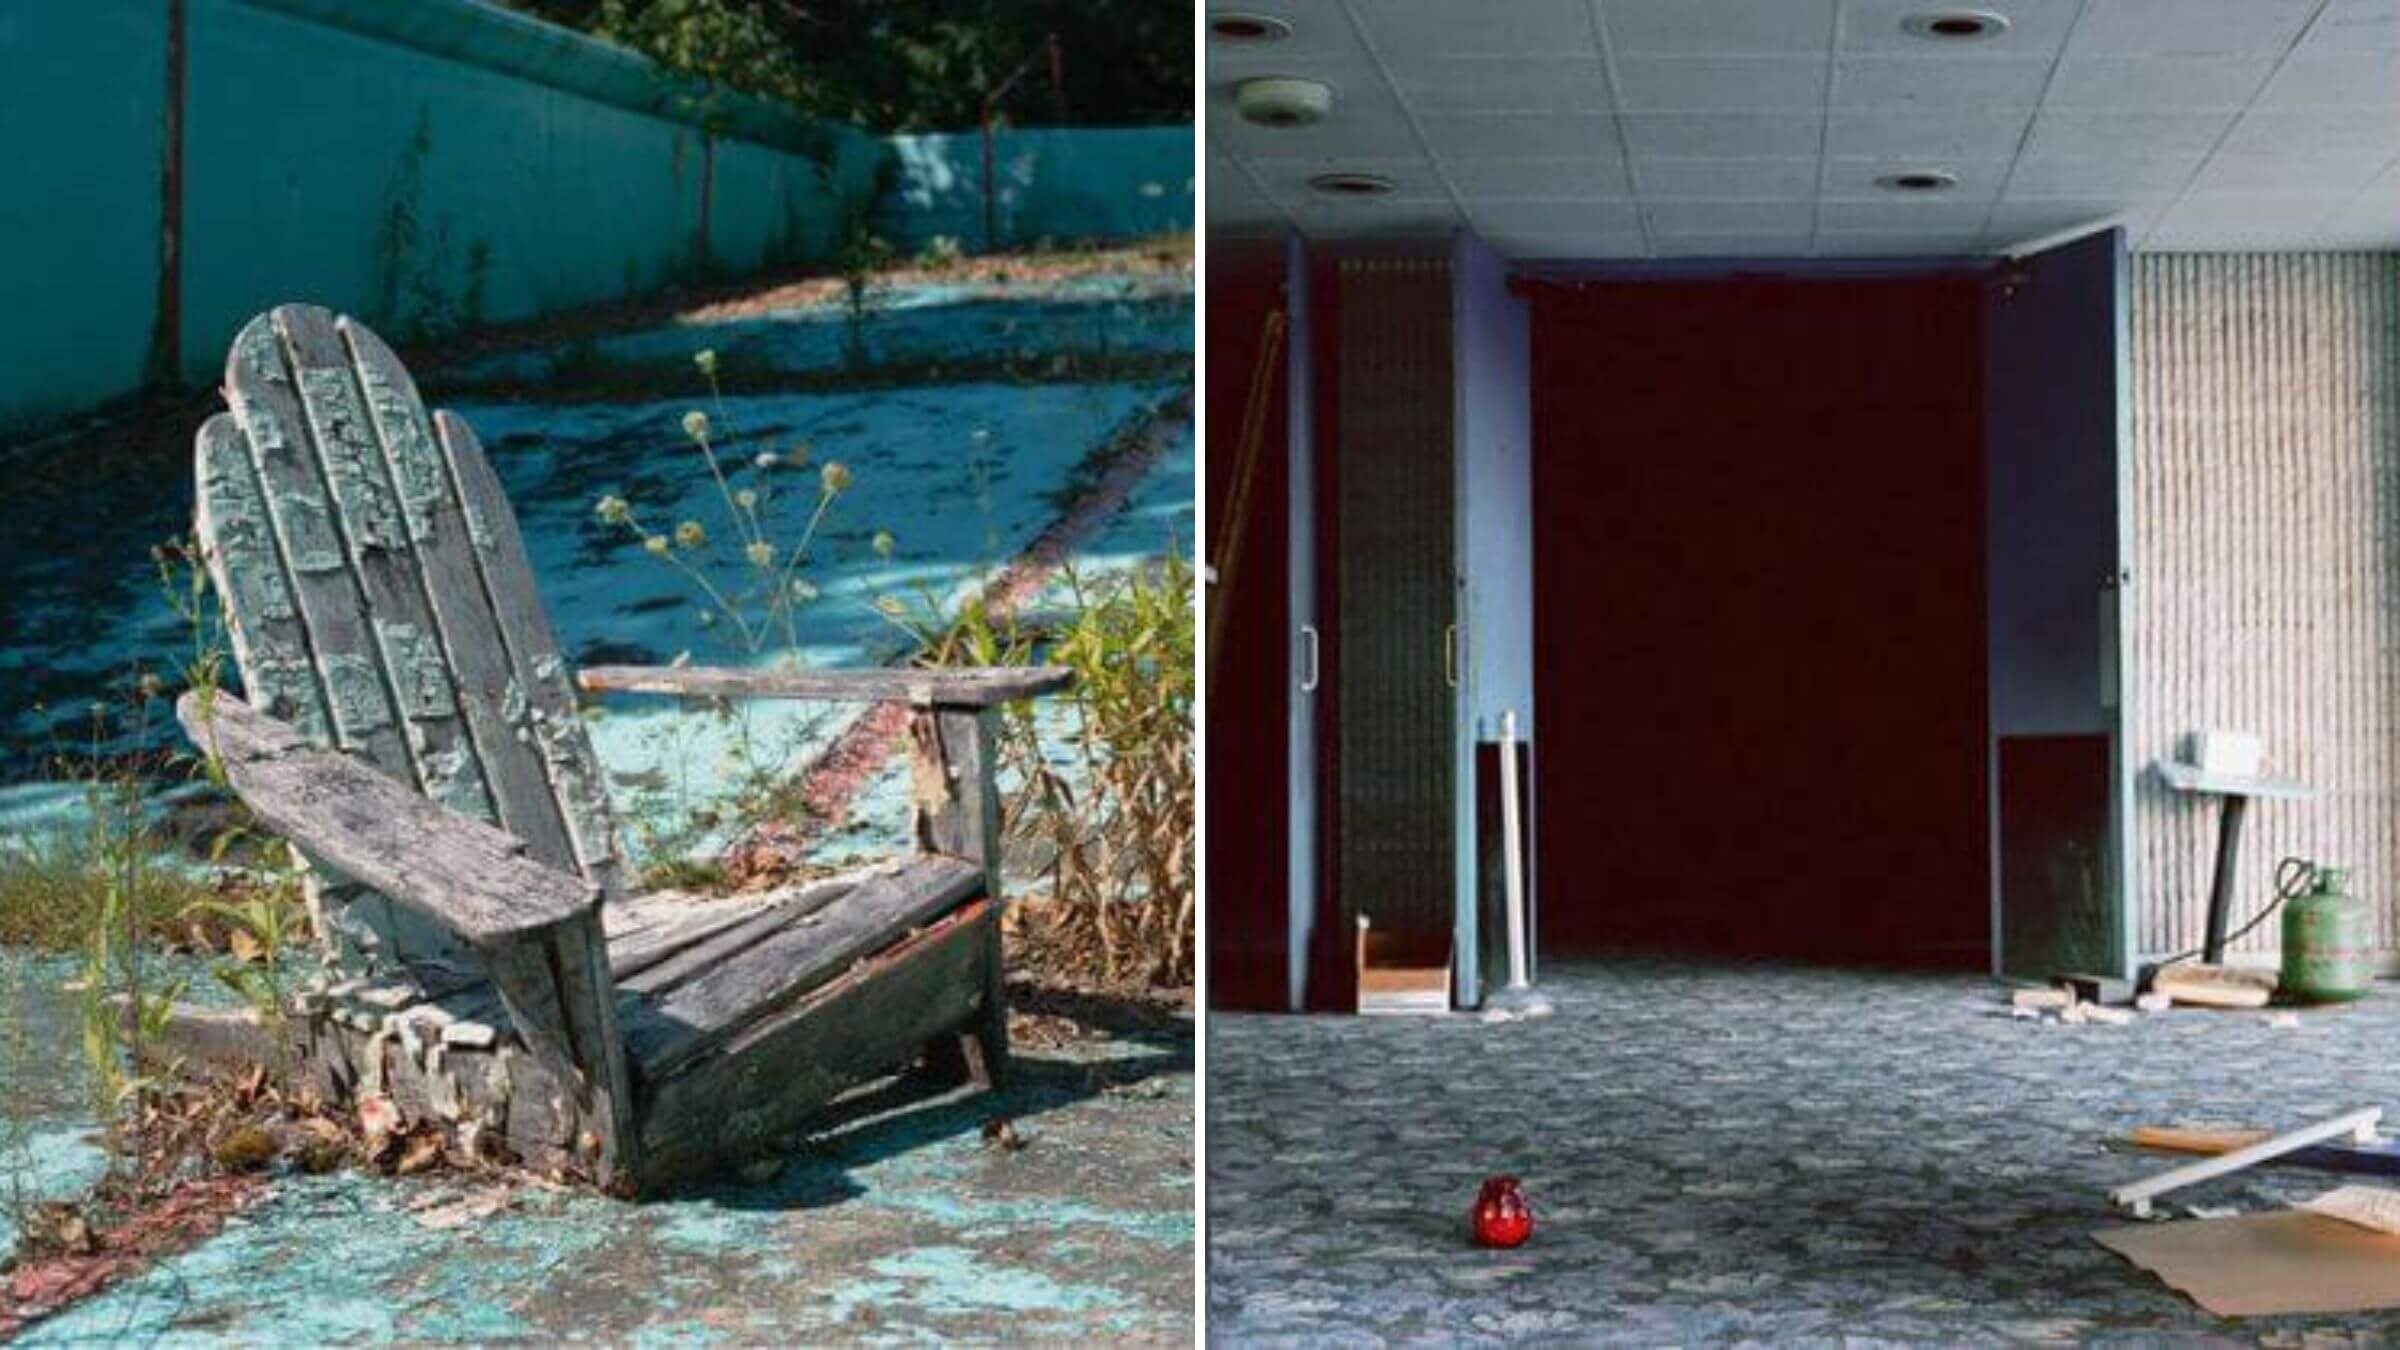 Two side-by-side photos showing a crumbling Adirondack chair and an abandoned hotel room, both taken by Marisa Scheinfeld at abandoned Borscht Belt resorts. 